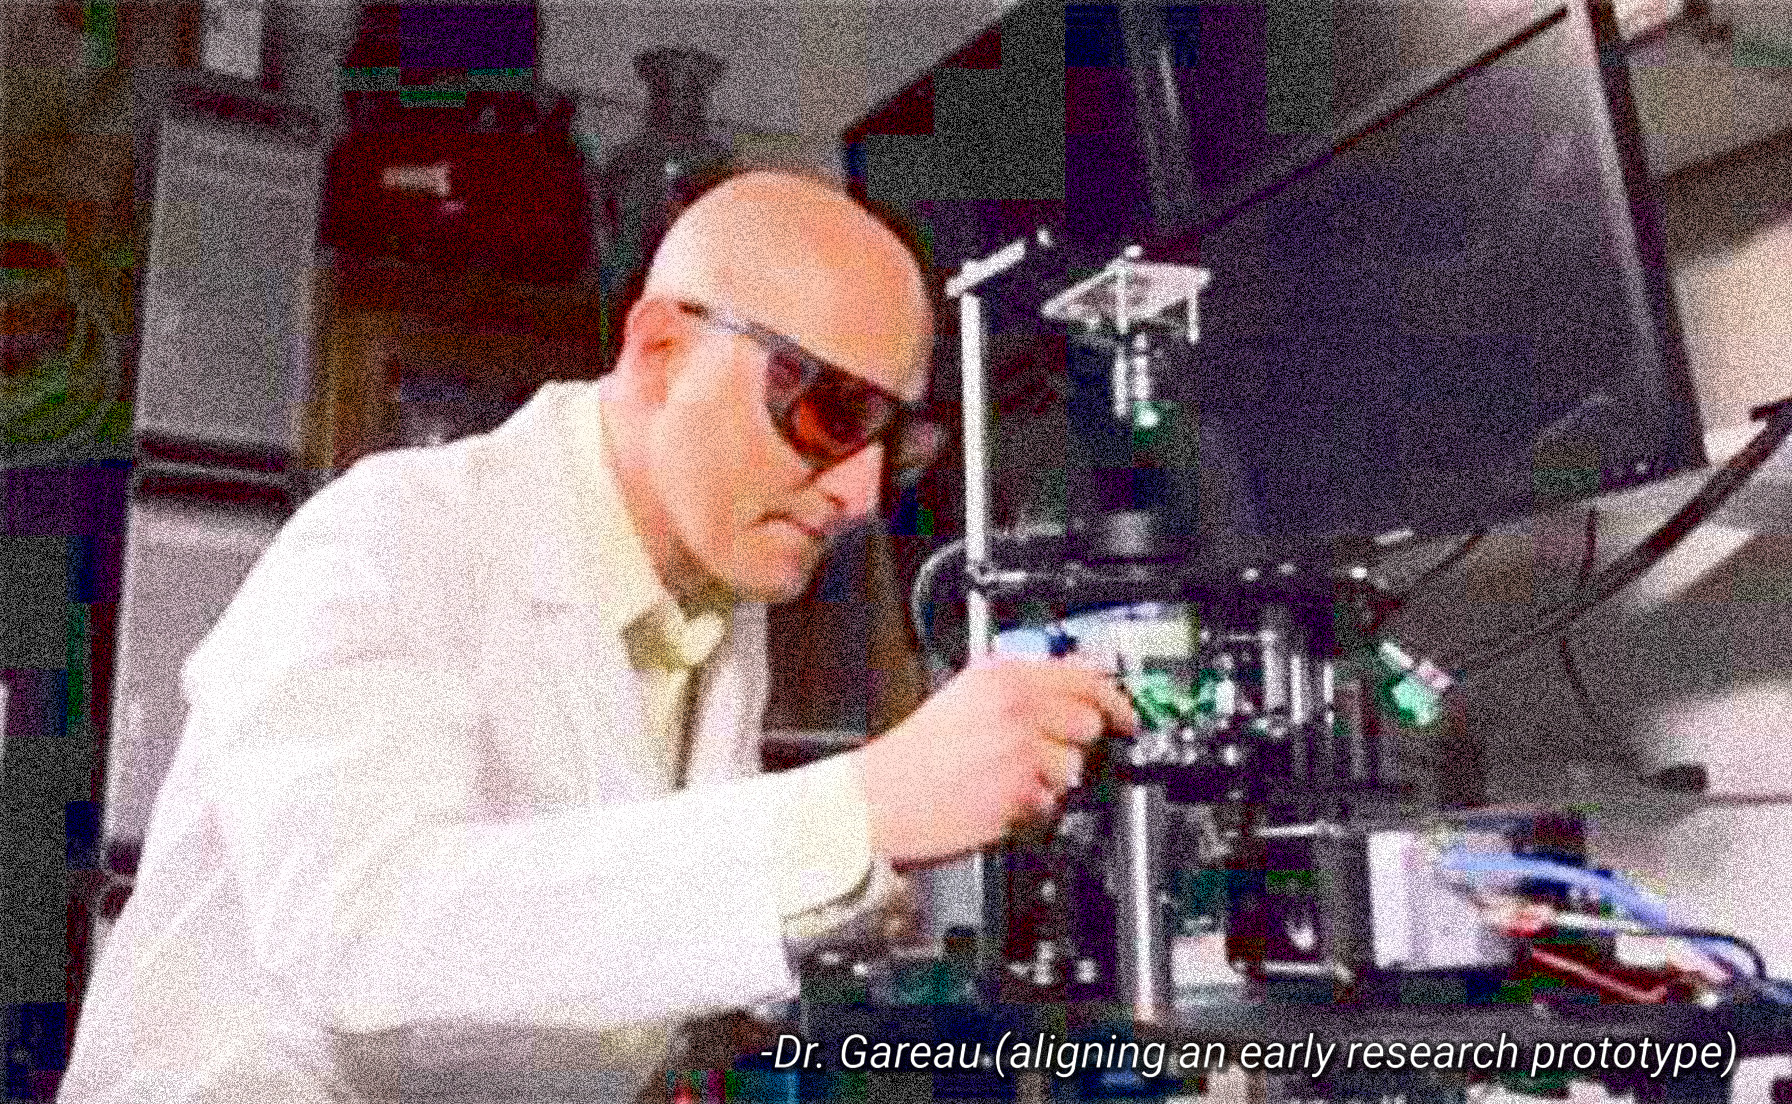 The world has not yet seen a microscope like this  -Dr. Gareau (aligning an early research prototype)